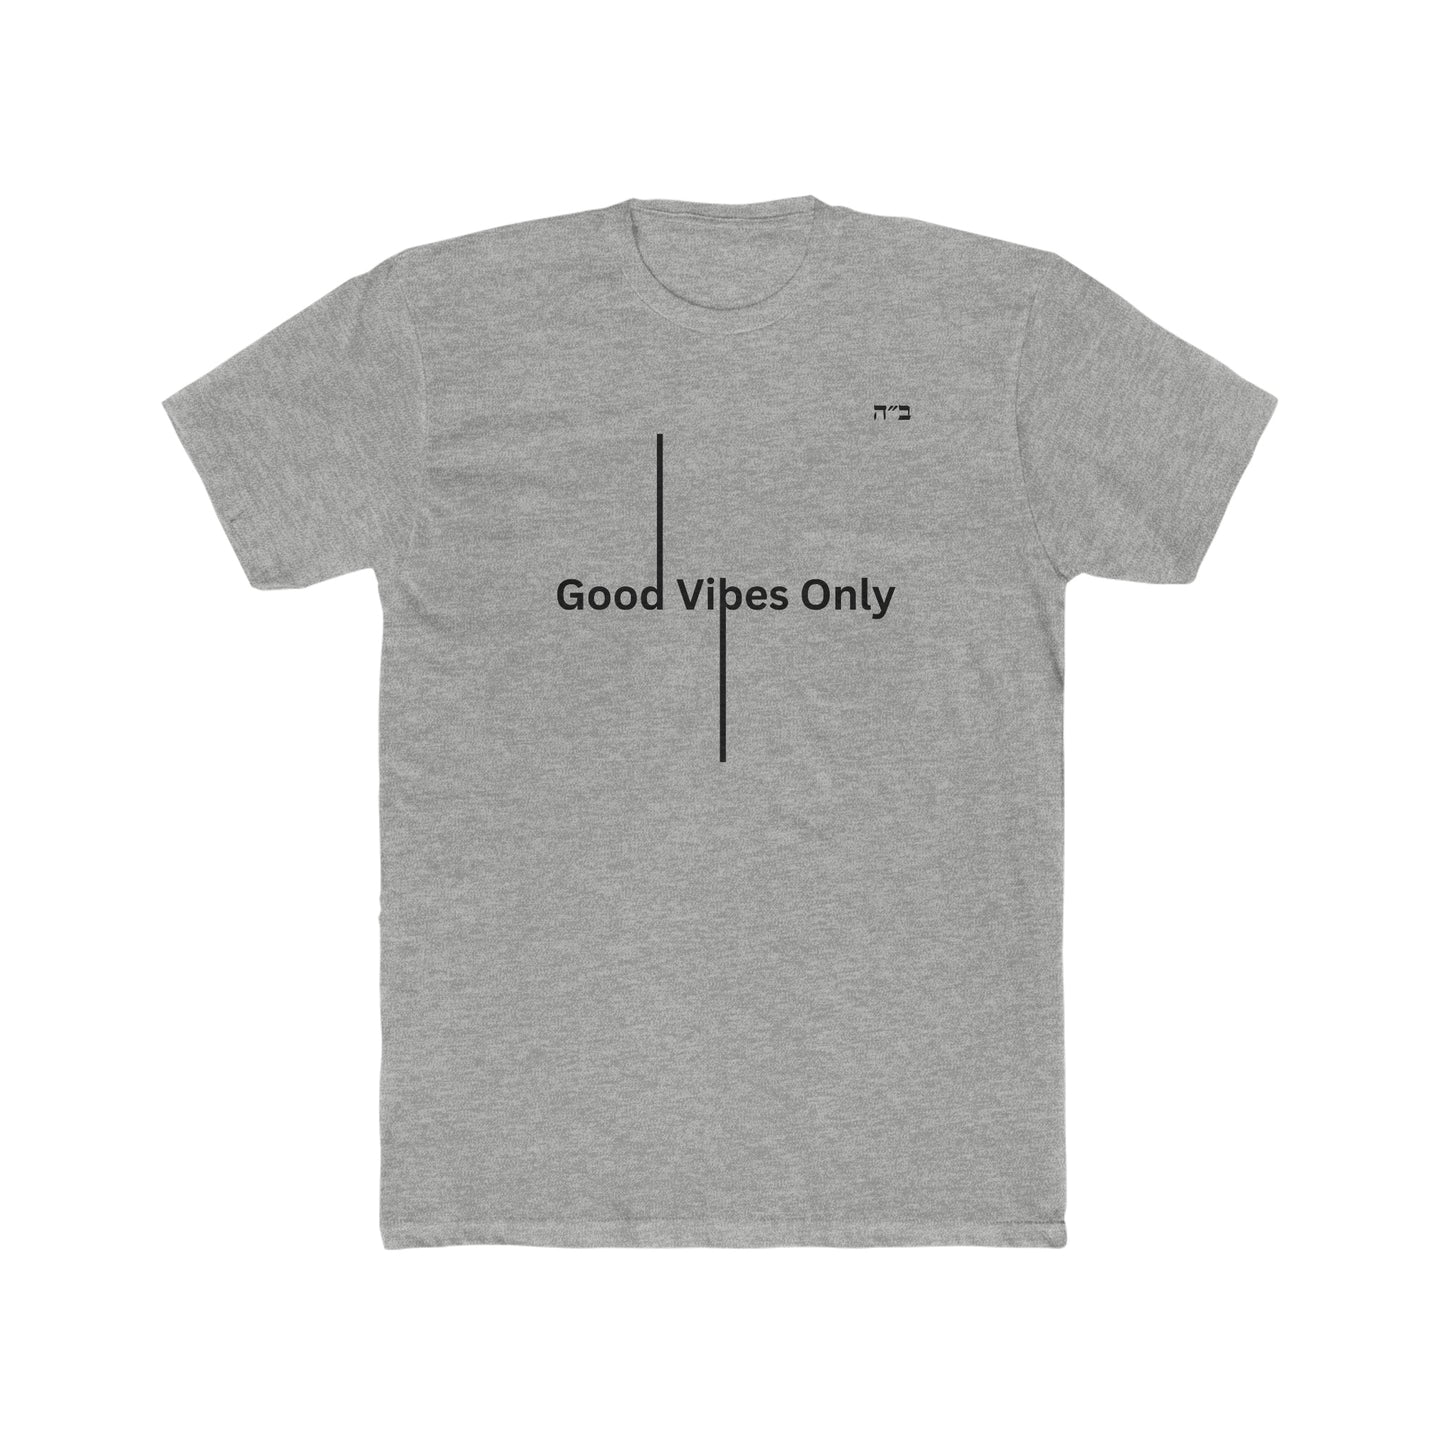 B"H Good Vibes Only Men's Tee